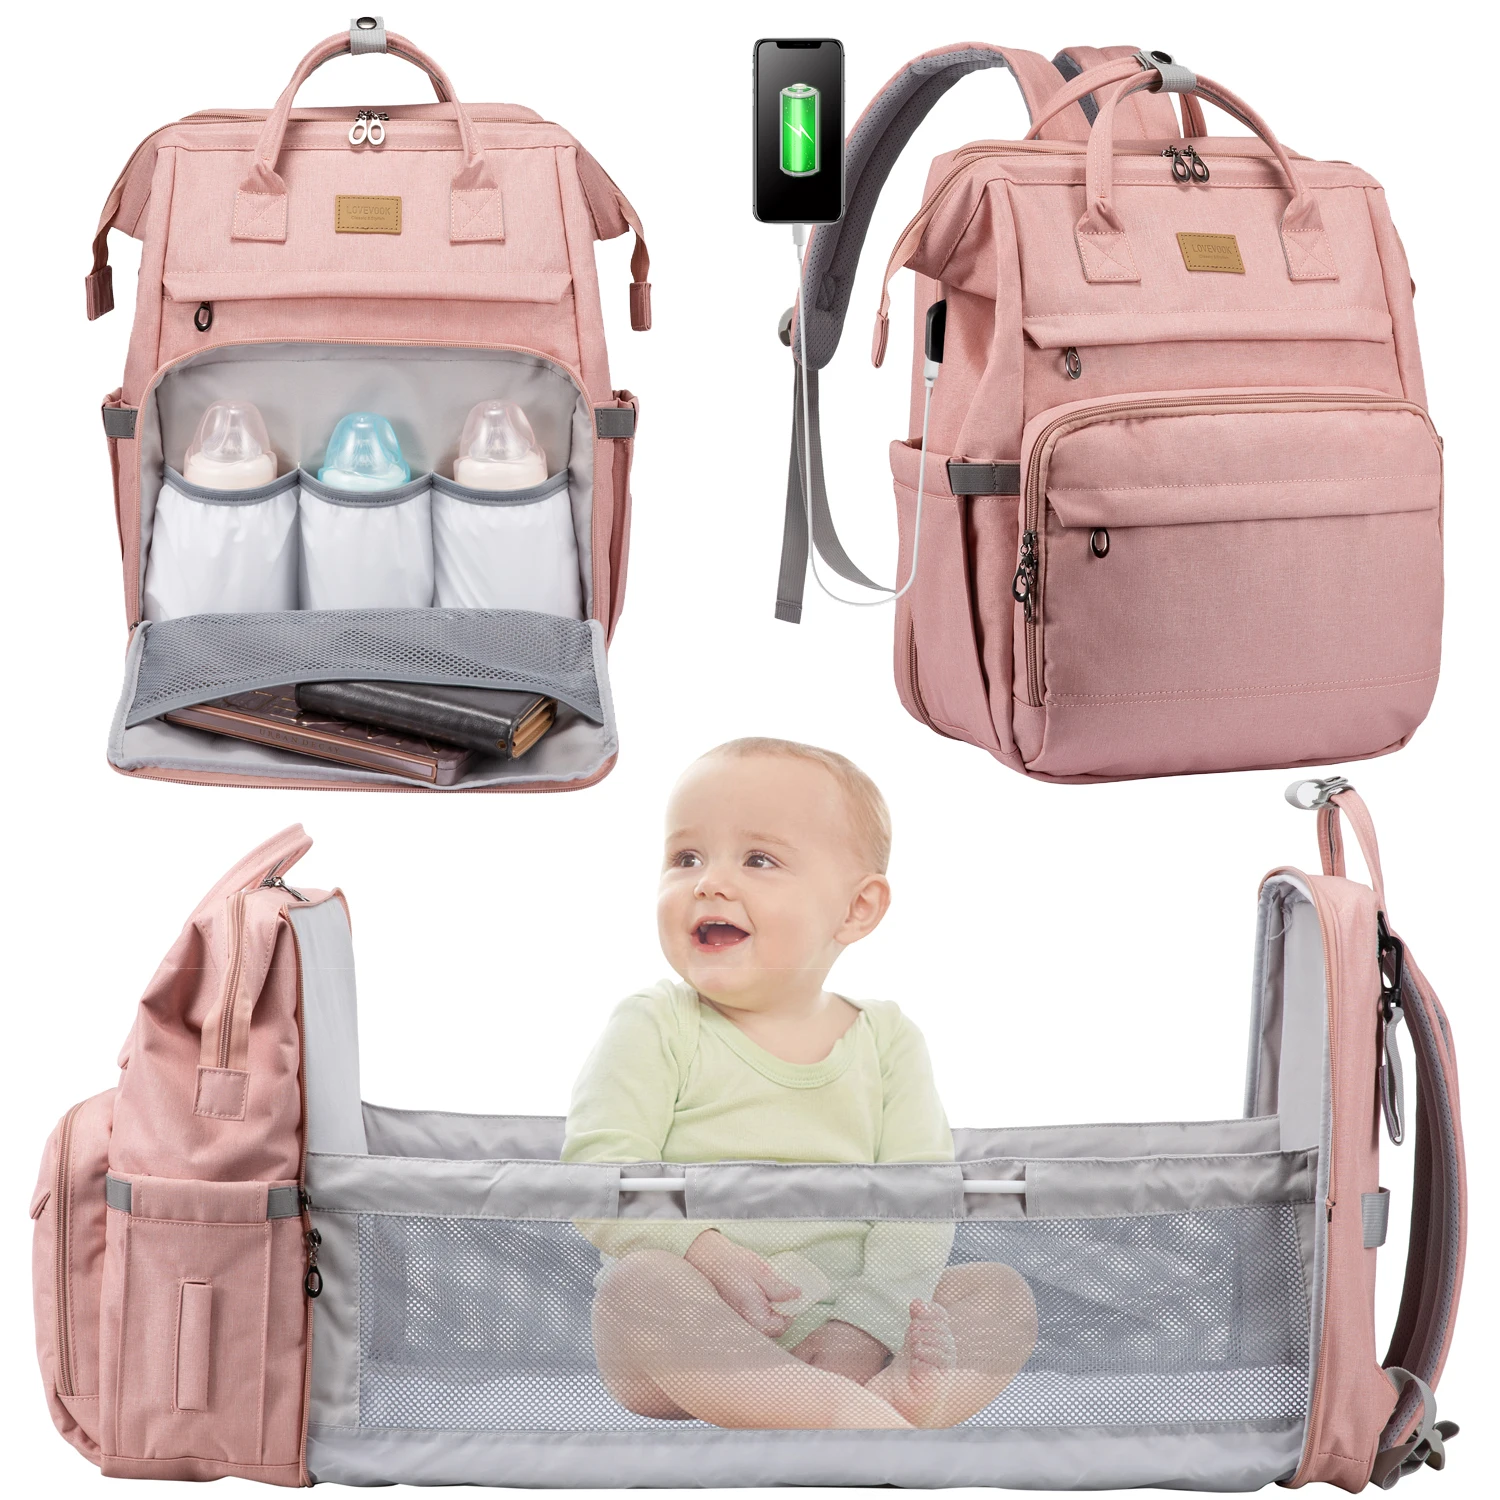 

LOVEVOOK High Quality Diaper Bag Portable Nappy Mommy Bagpack Travel Changing Pad Backpack Foldable Baby Bed Diaper Bag Backpack, Customized colors